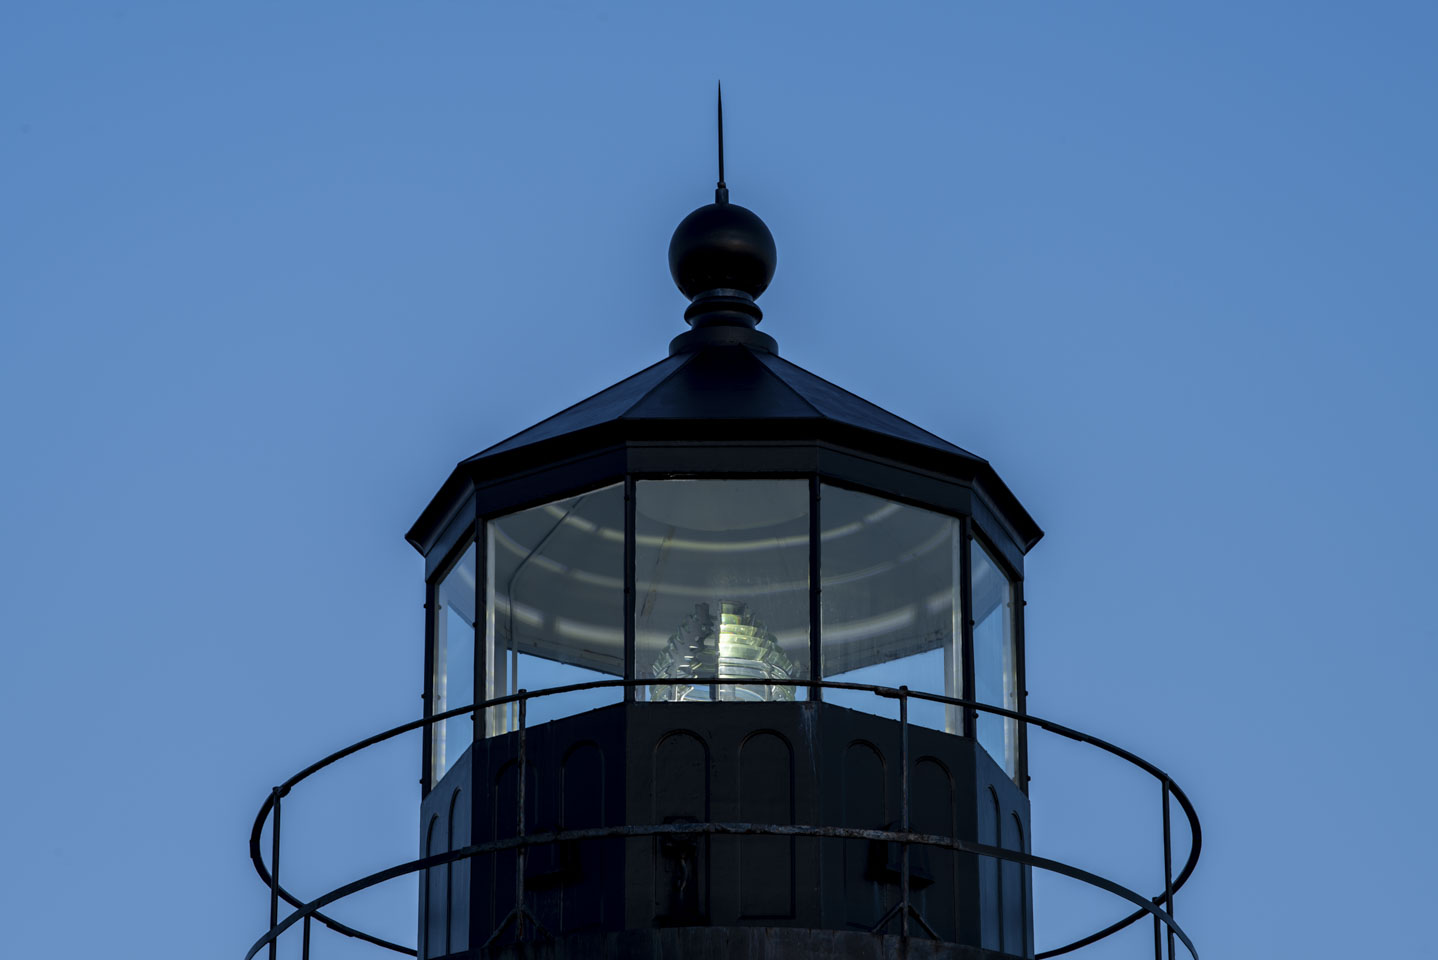 Pemaquid Lighthouse lantern room with the light on